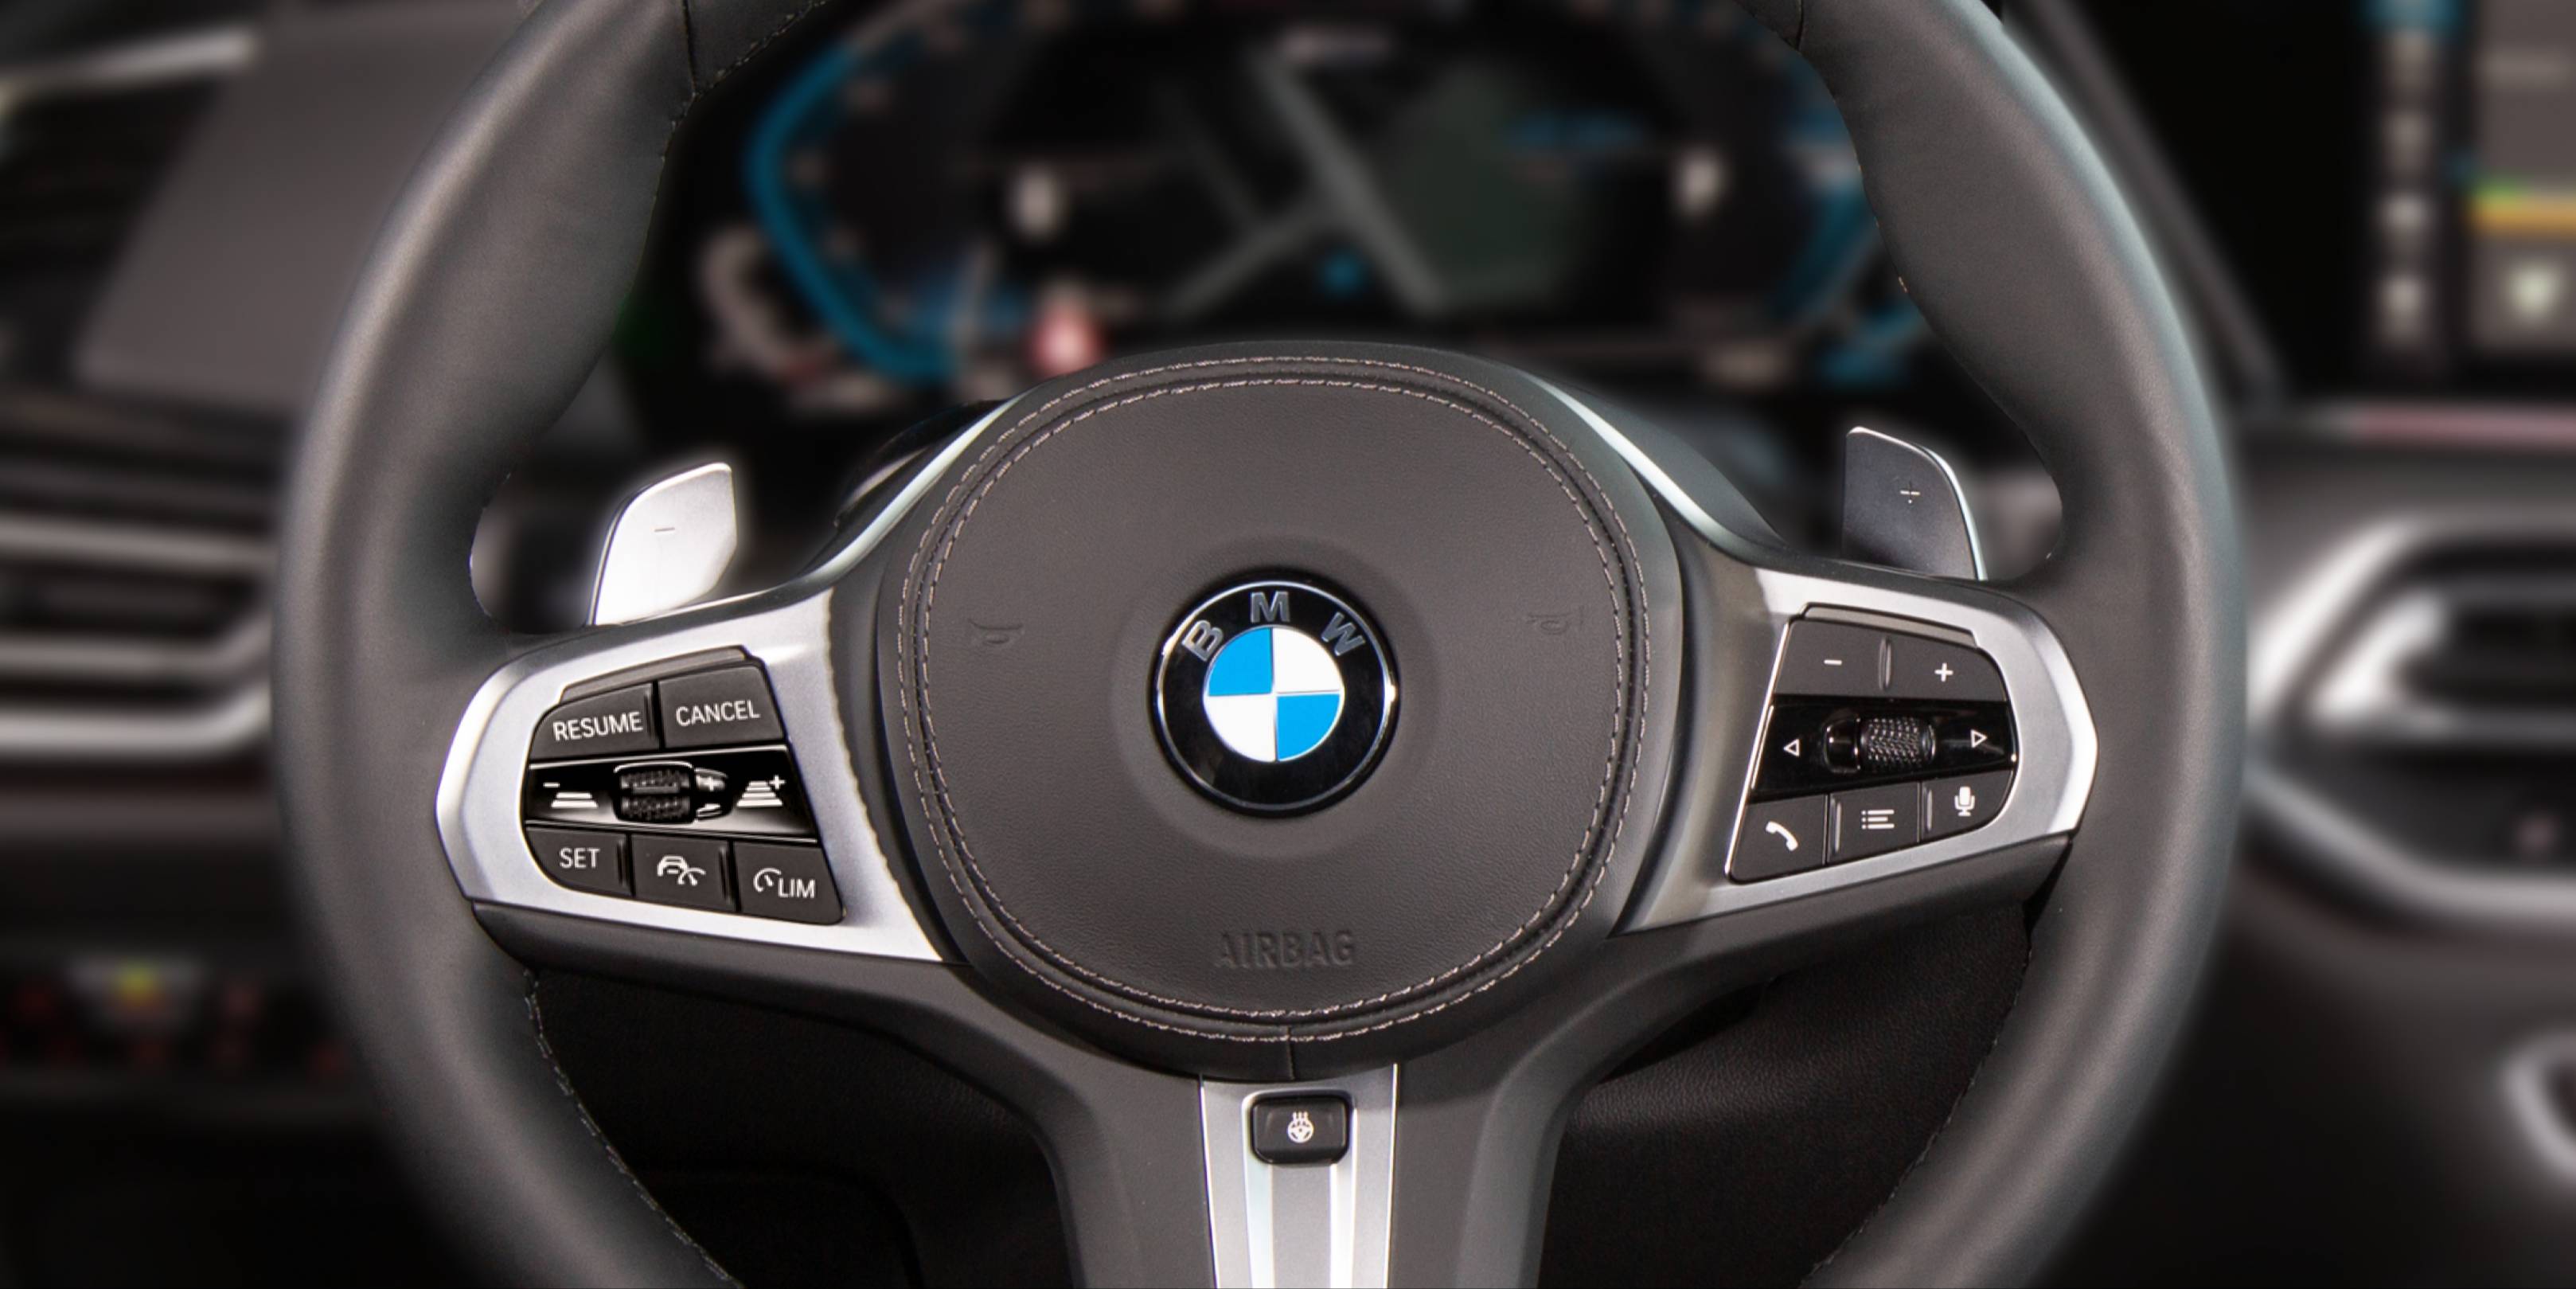 How to turn on the heated steering wheel in a BMW